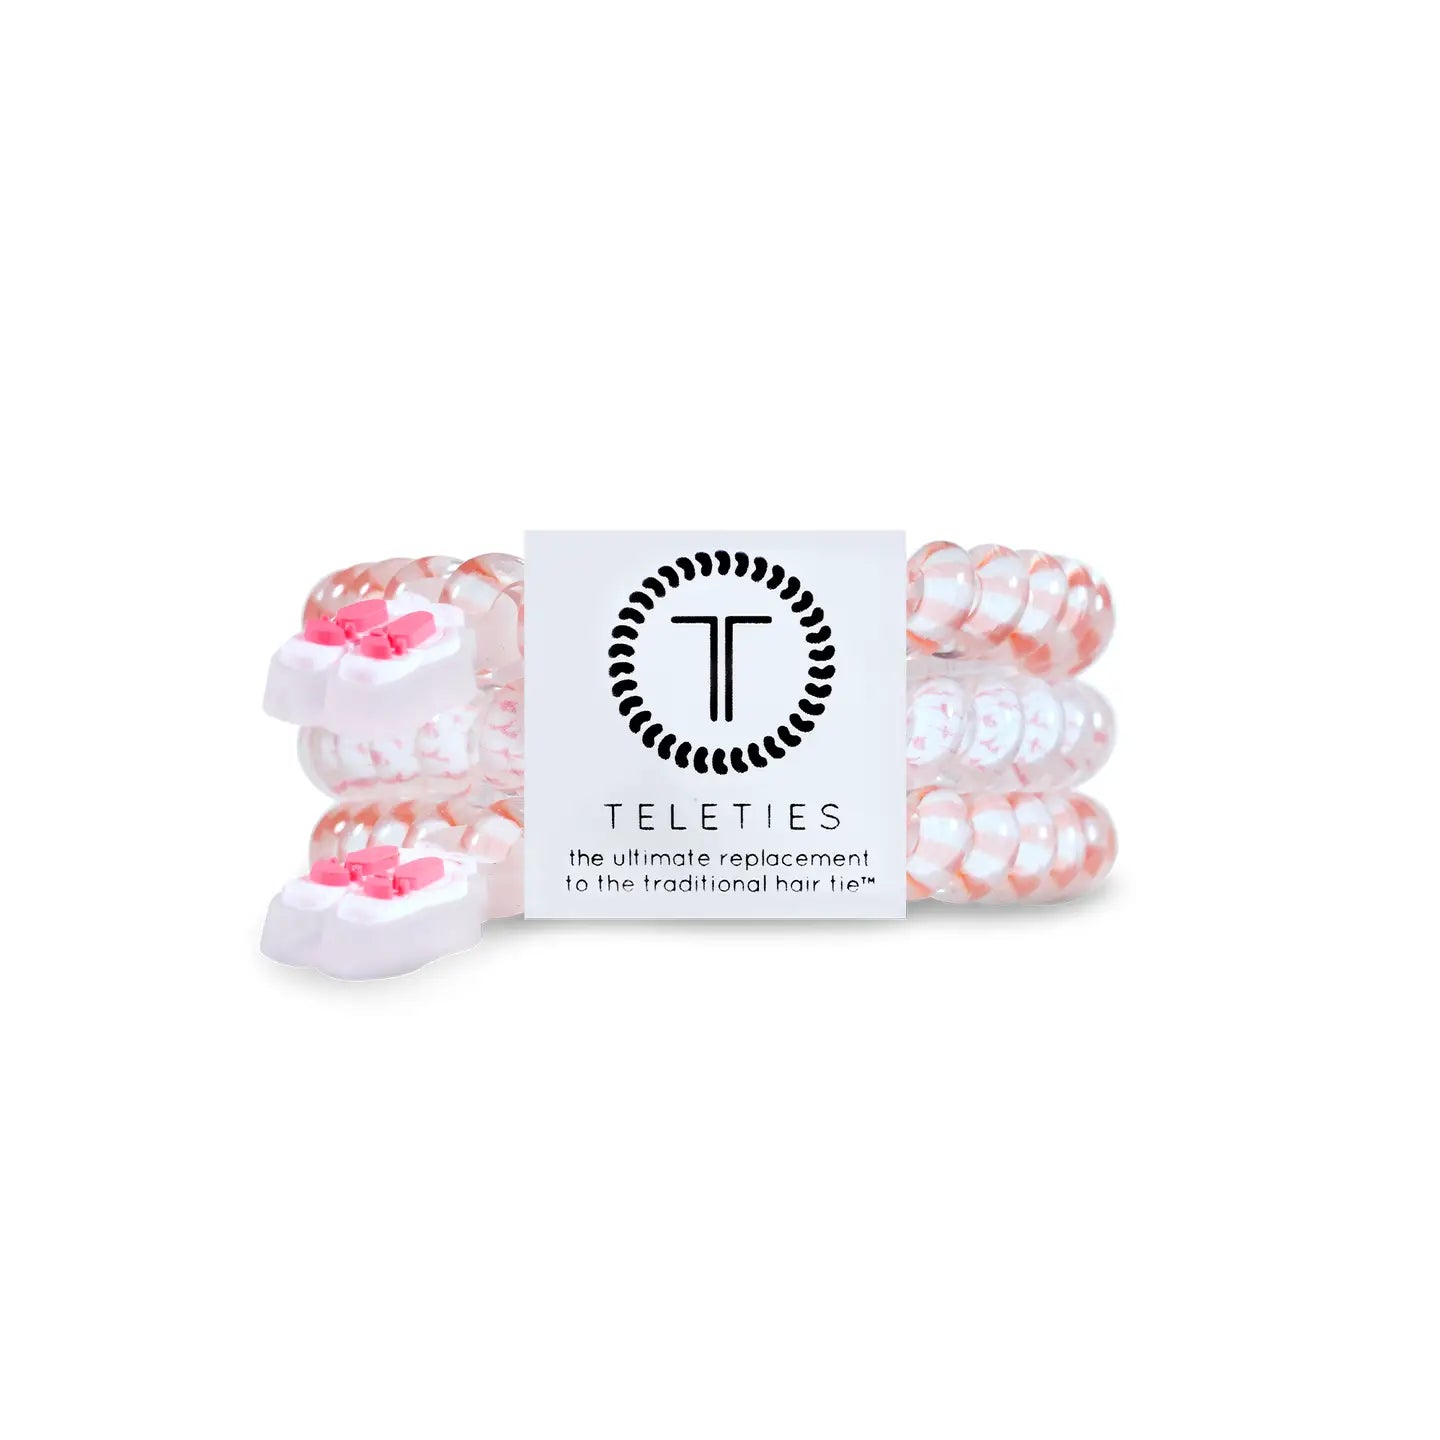 set of three hair coils: two white with pink stripes and ballet shoe charms, one white with tiny pink ballerinas